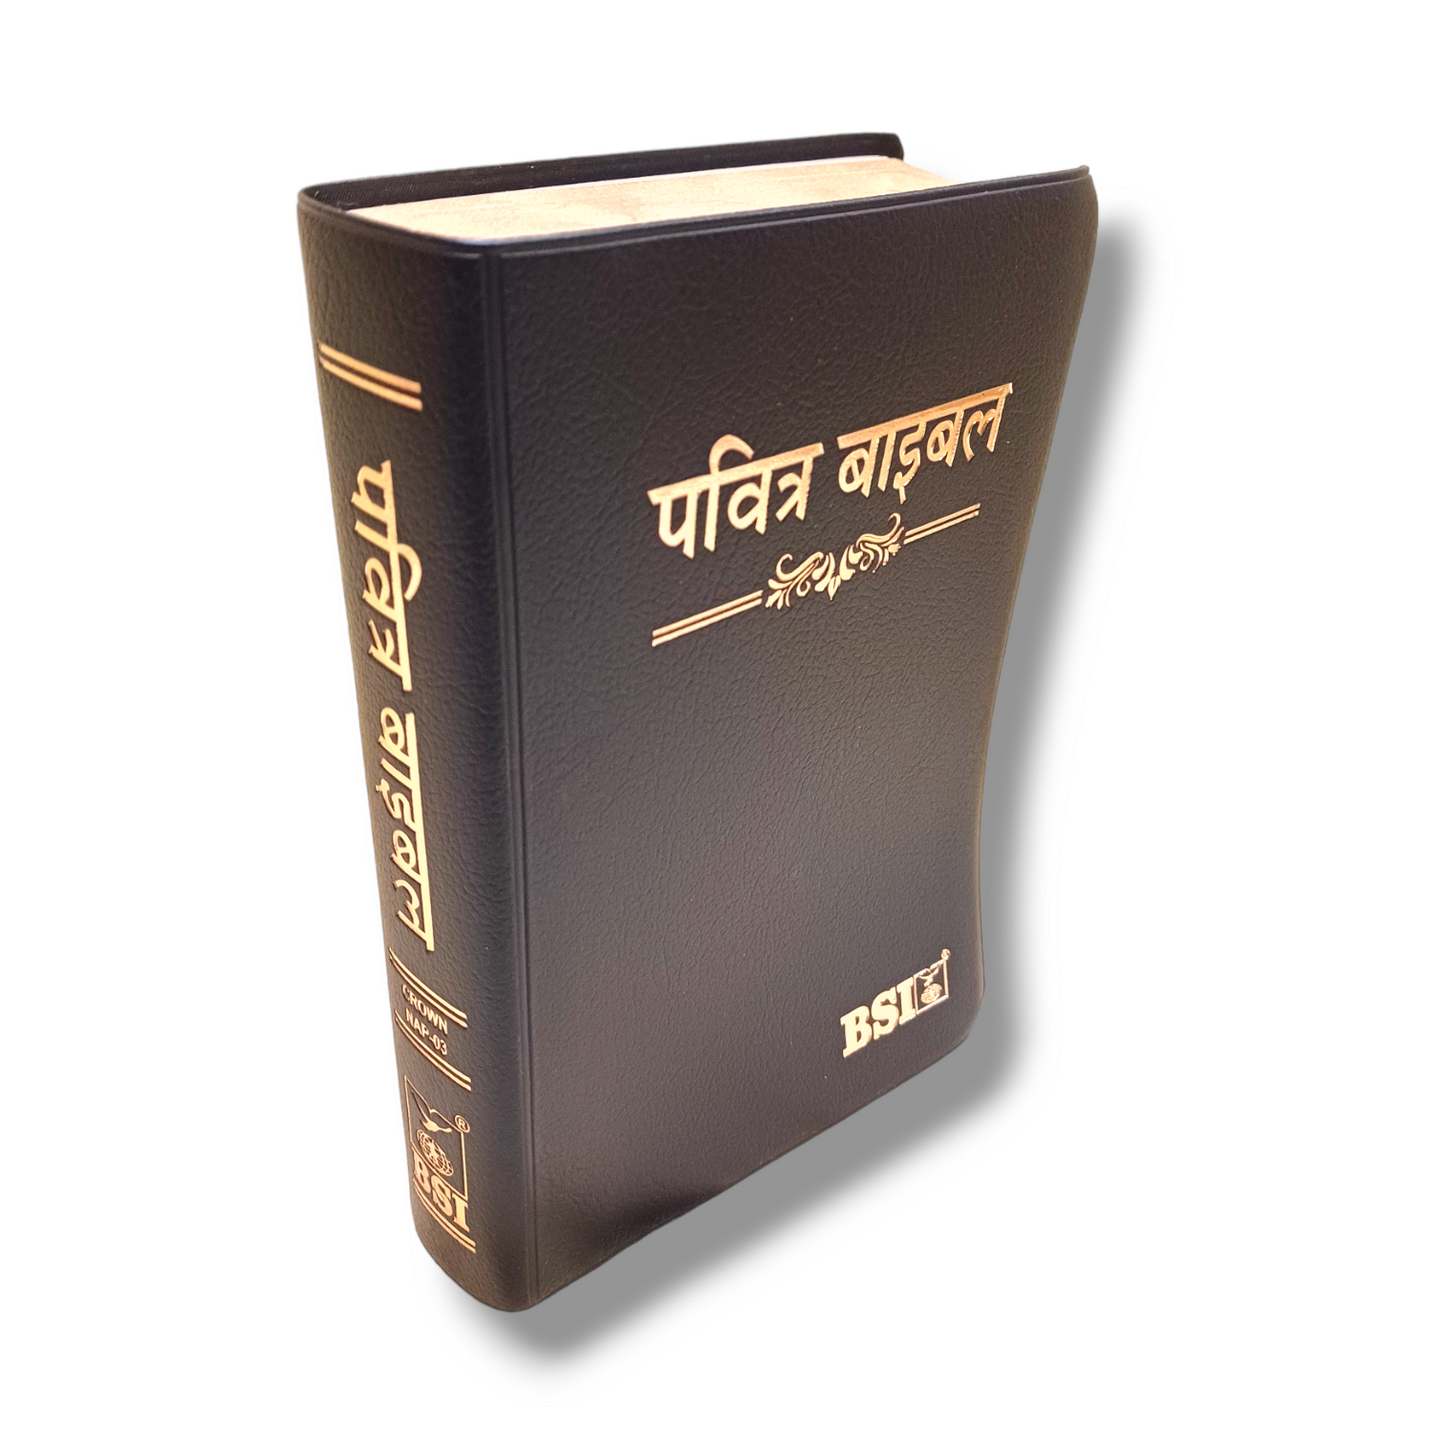 The Holy Bible In Hindi |Crown Black Color Bound |Golden Edge Bible |Hindi Compact Size Bible